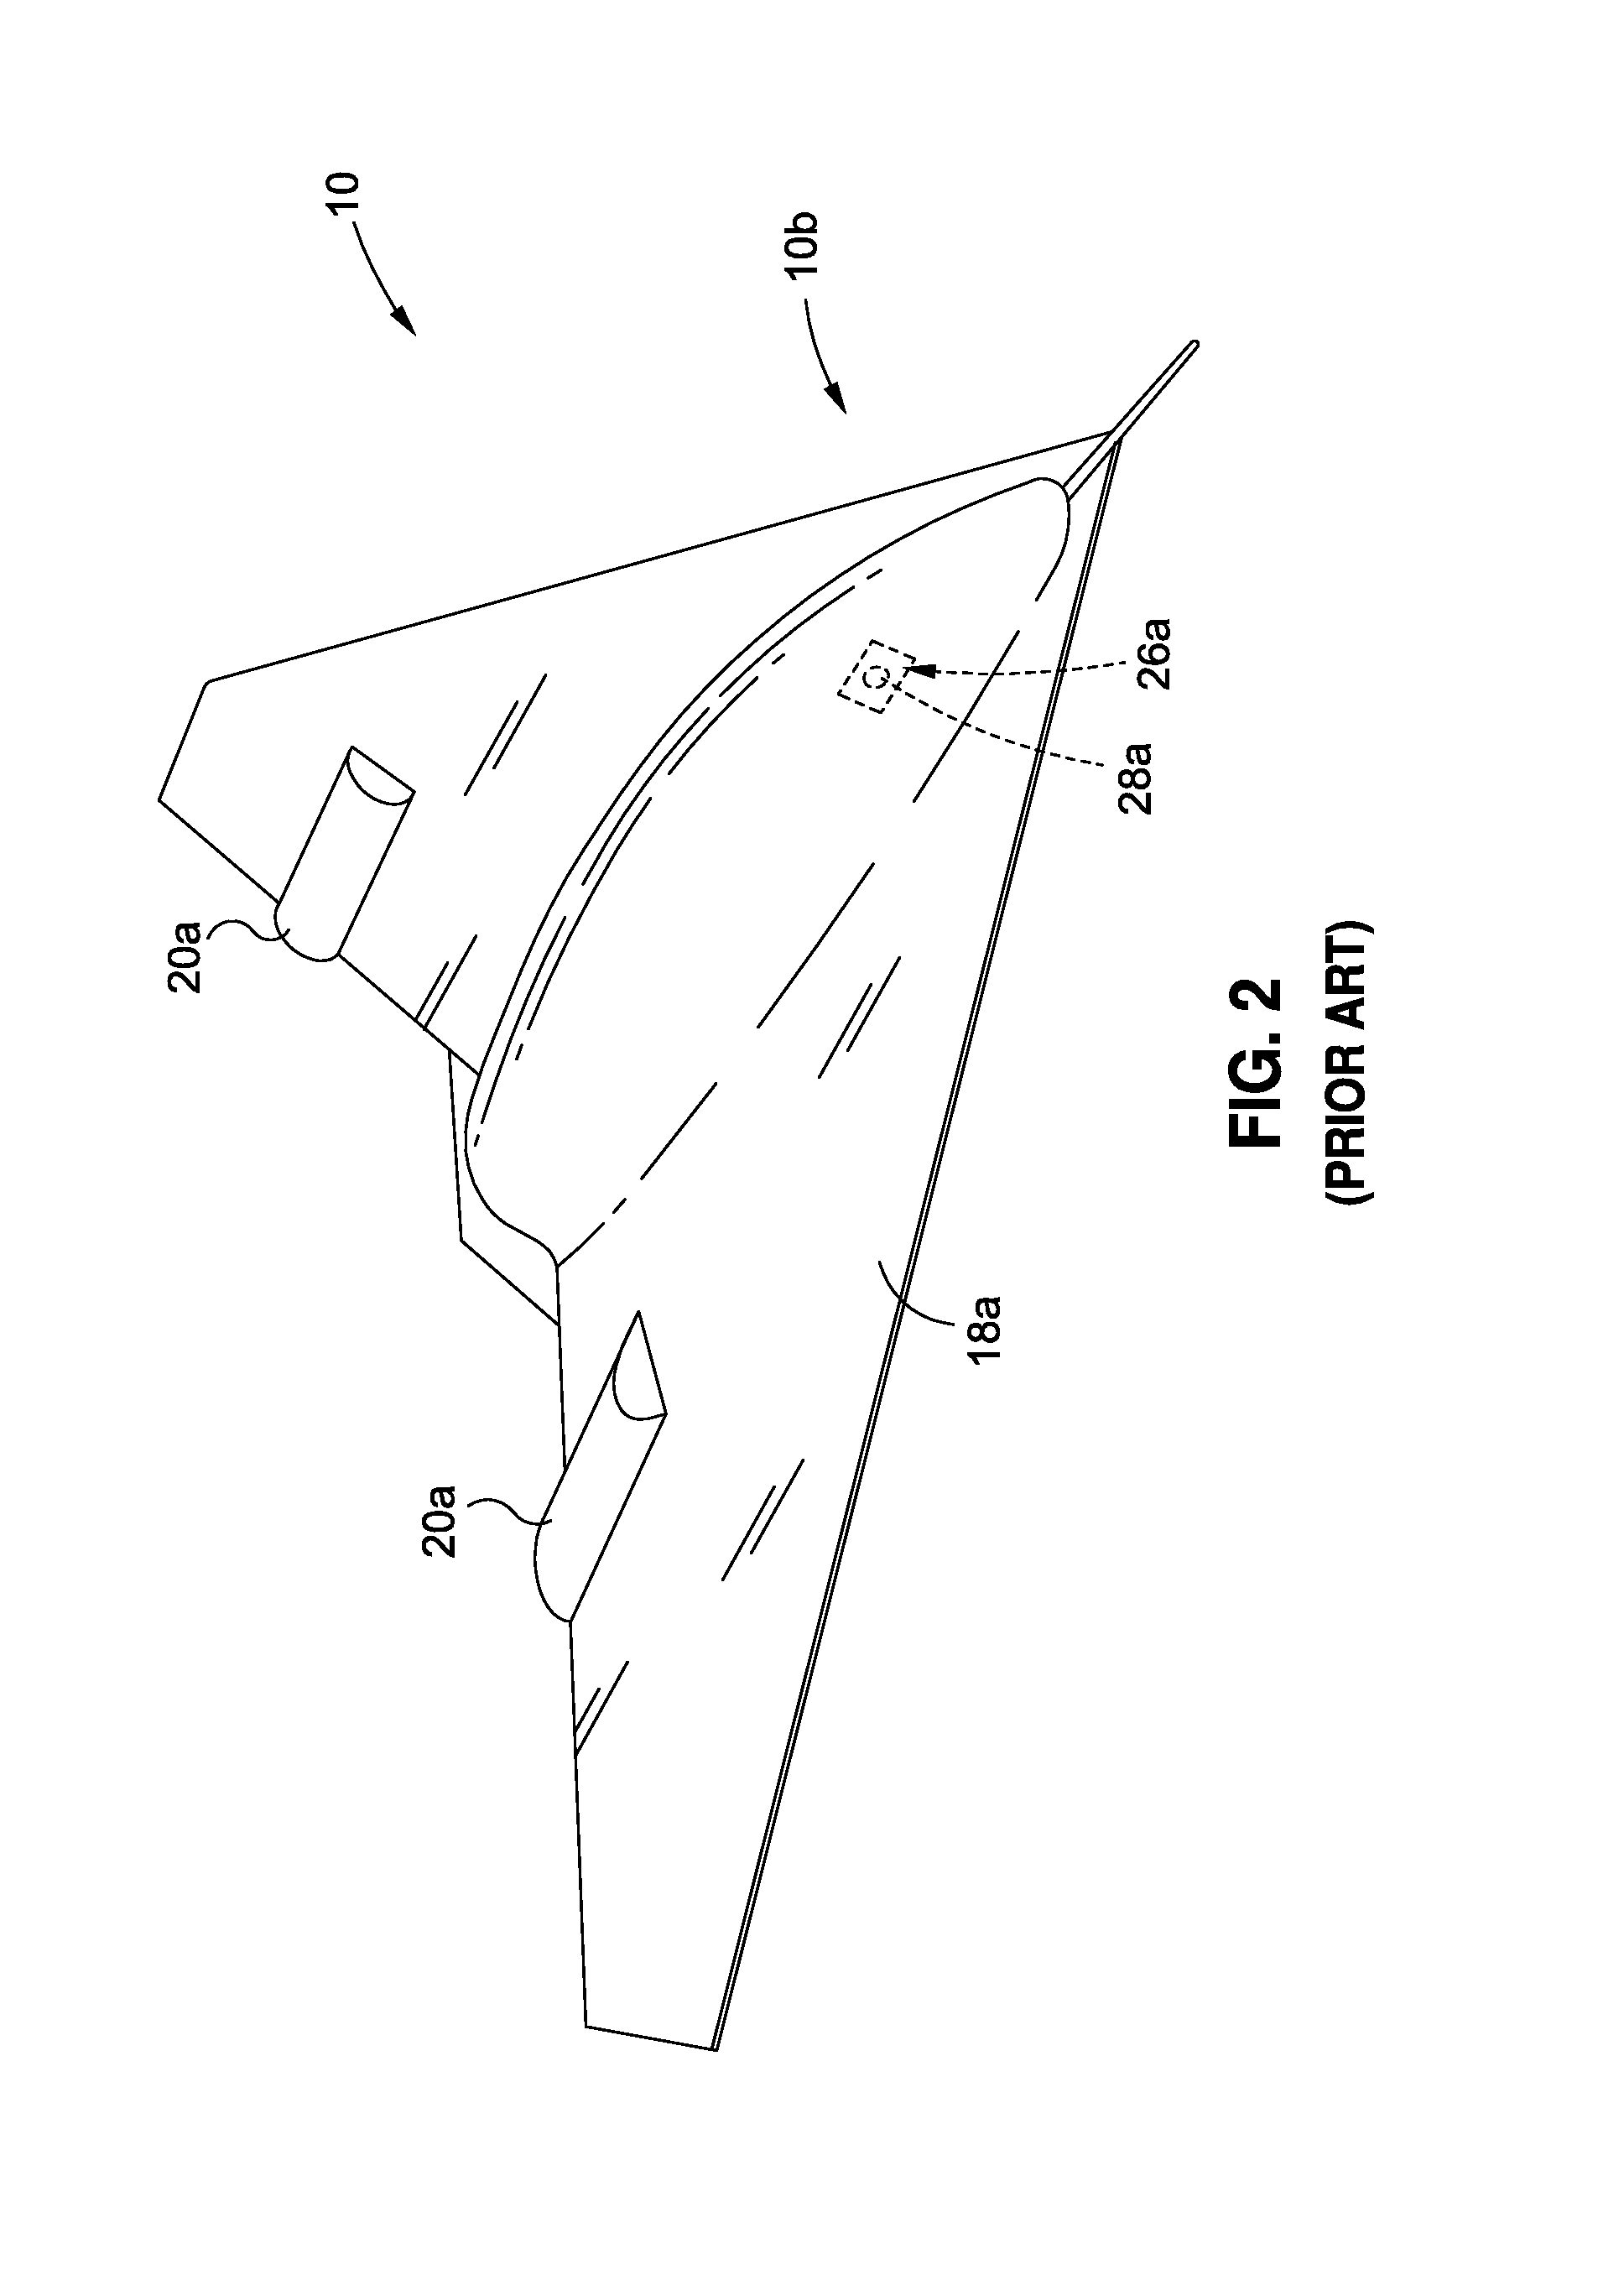 System and method for acoustic signature health monitoring of unmanned autonomous vehicles (UAVS)